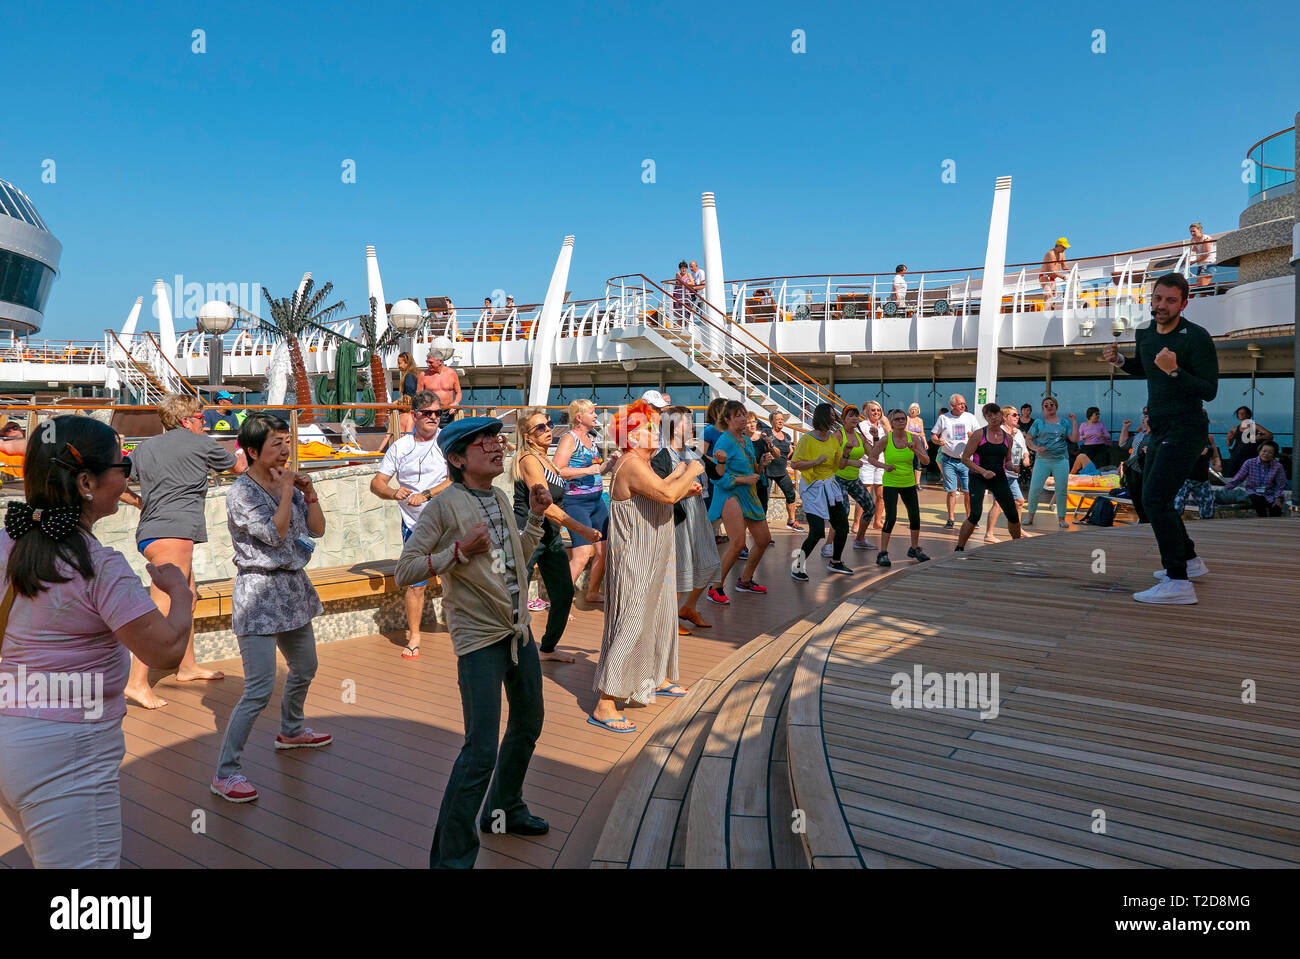 Passengers dancing on the deck of a cruise ship following the lead of a staff entertainer on stage during a dance class Stock Photo